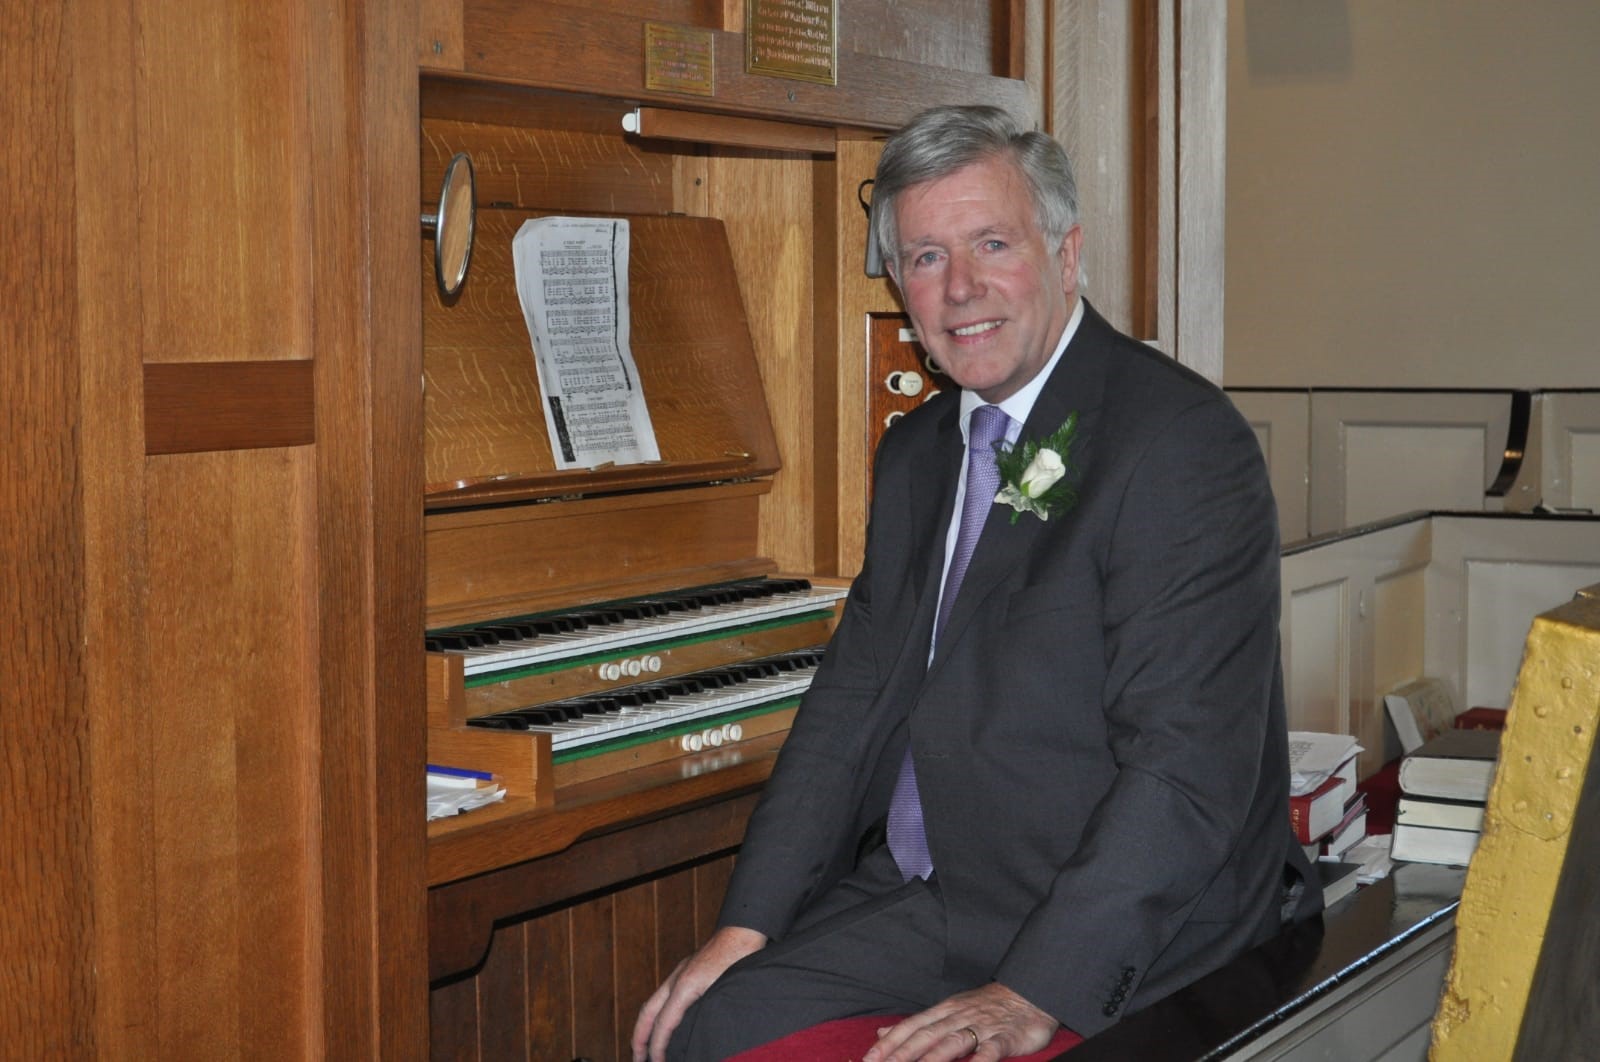 Robert Yarr BEM at the organ in Ballinderry Parish Church which he has presided over for the past 60 years.